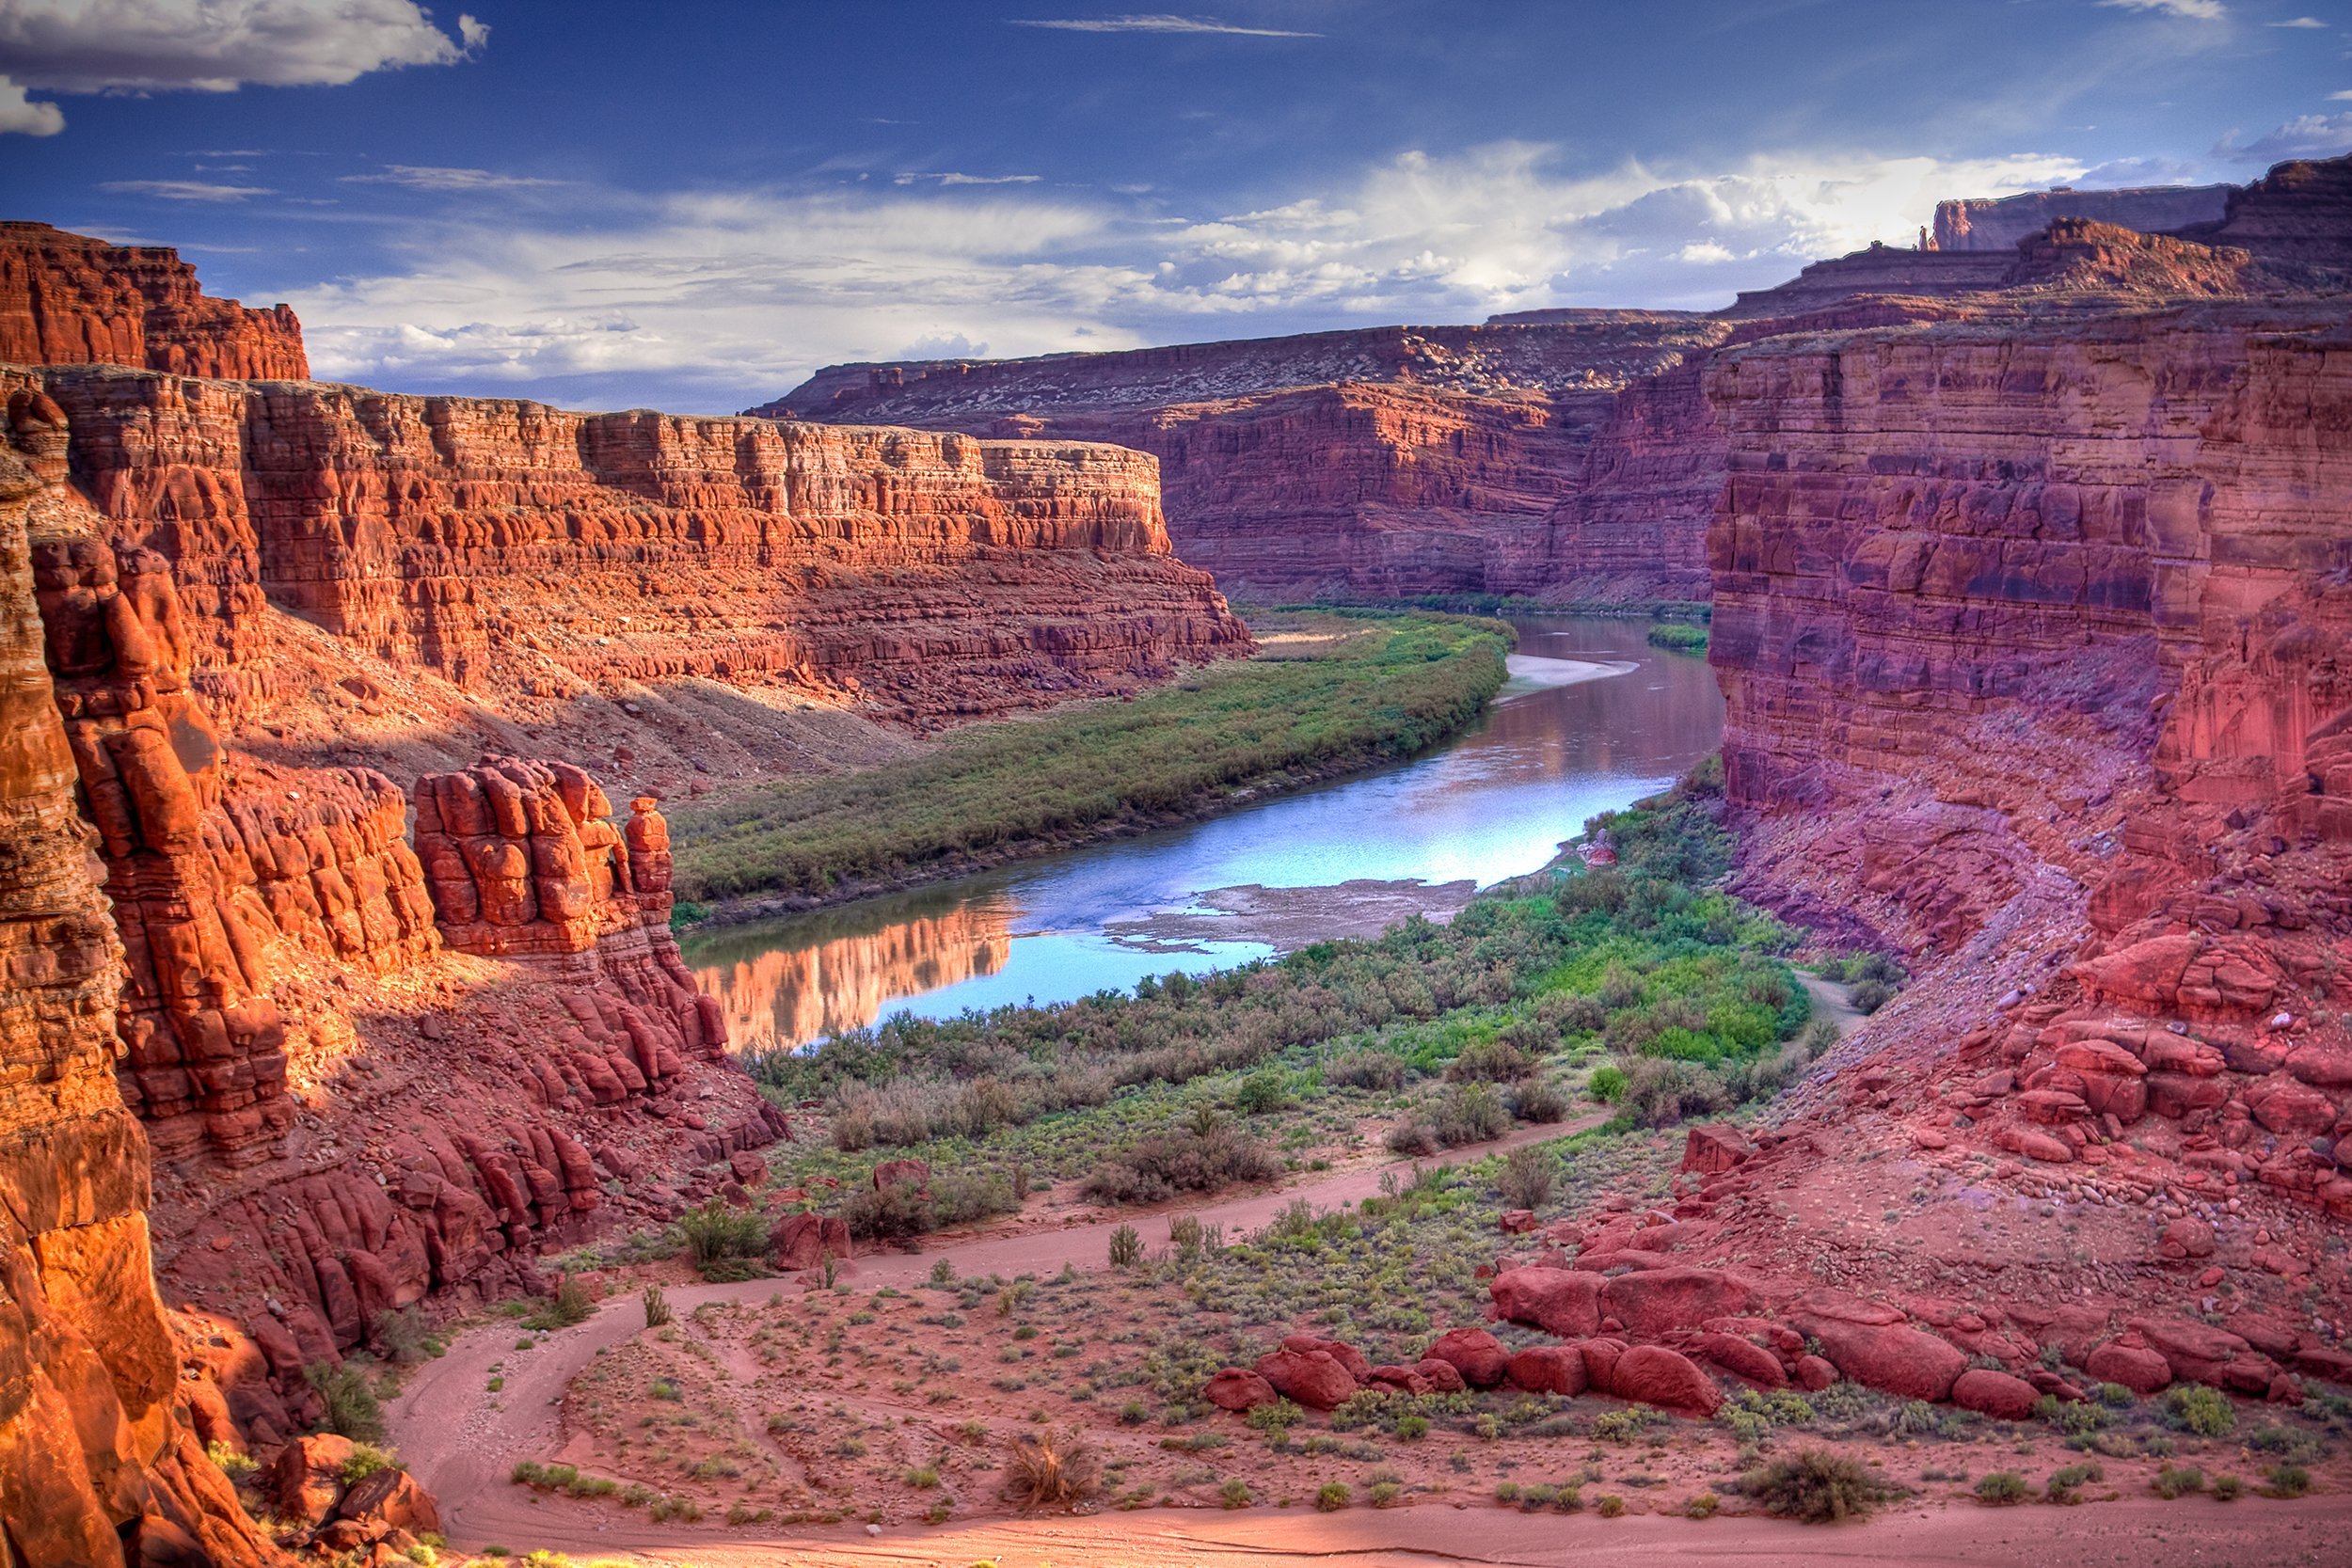 <p>Canyonlands, carved by the Colorado River and boasting fantastical buttes, is an underrated treasure among national parks, says Bridget Kochersperger, of the blog <a href="https://whereiwillroam.com">Where I Will Roam</a>. And lodging and campgrounds around it are reasonably priced.</p>